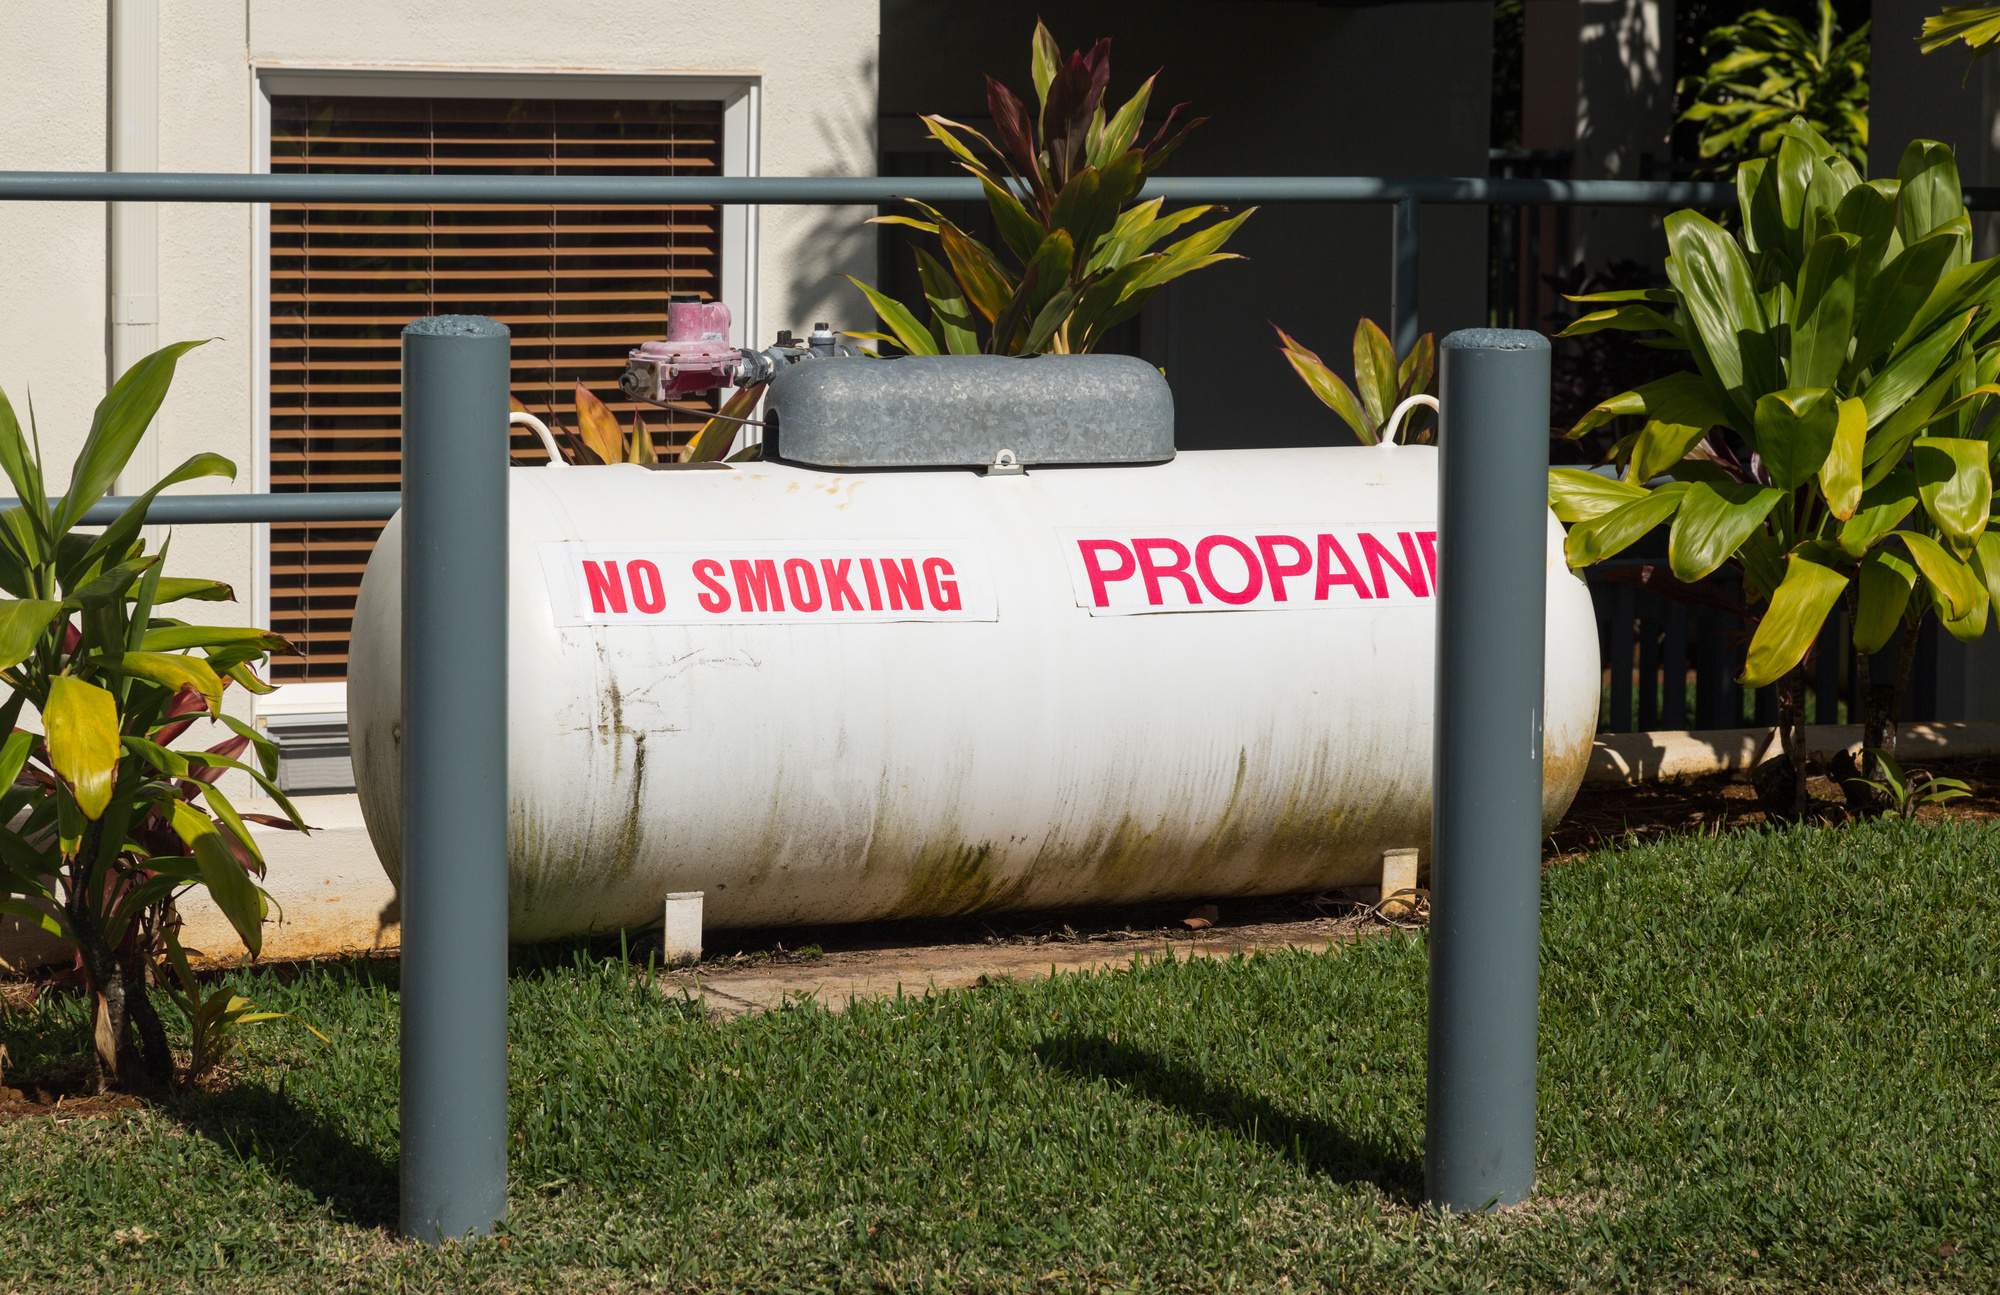 Natural Gas or Propane: Which Is Better?